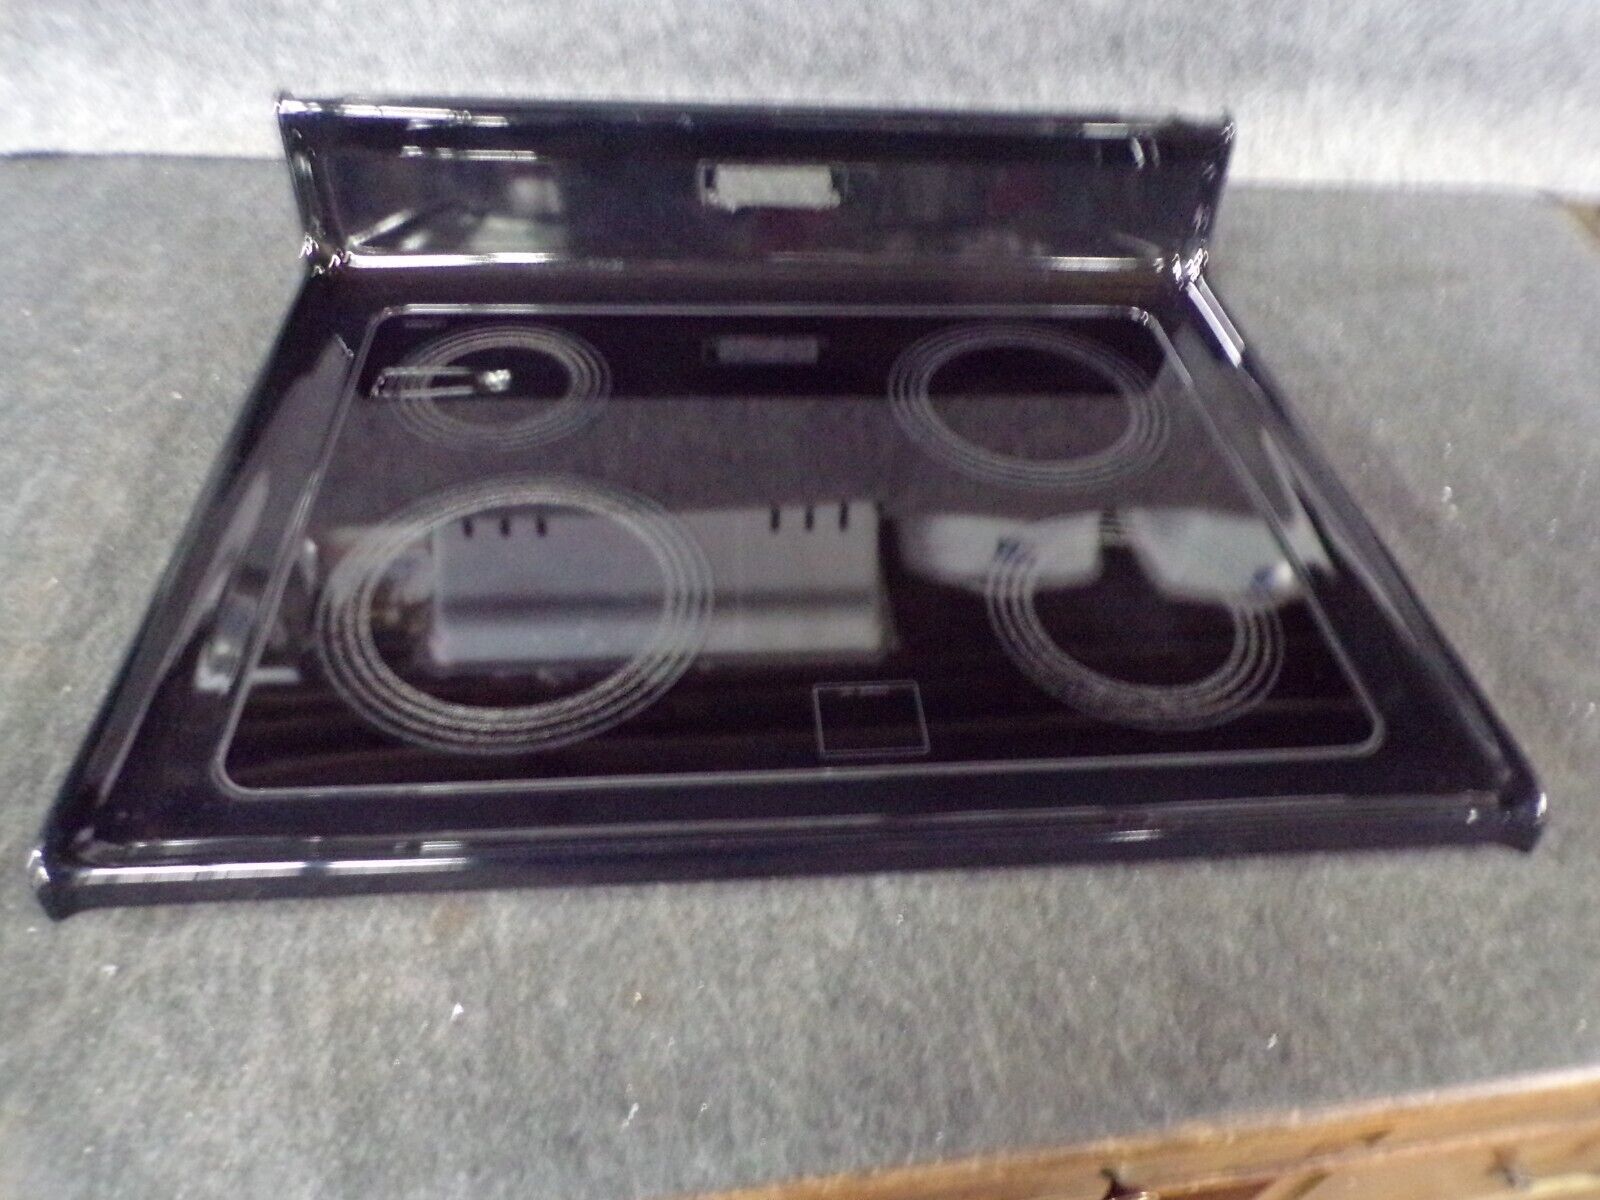 Primary image for 3176529 WHIRLPOOL RANGE OVEN MAIN TOP GLASS COOKTOP